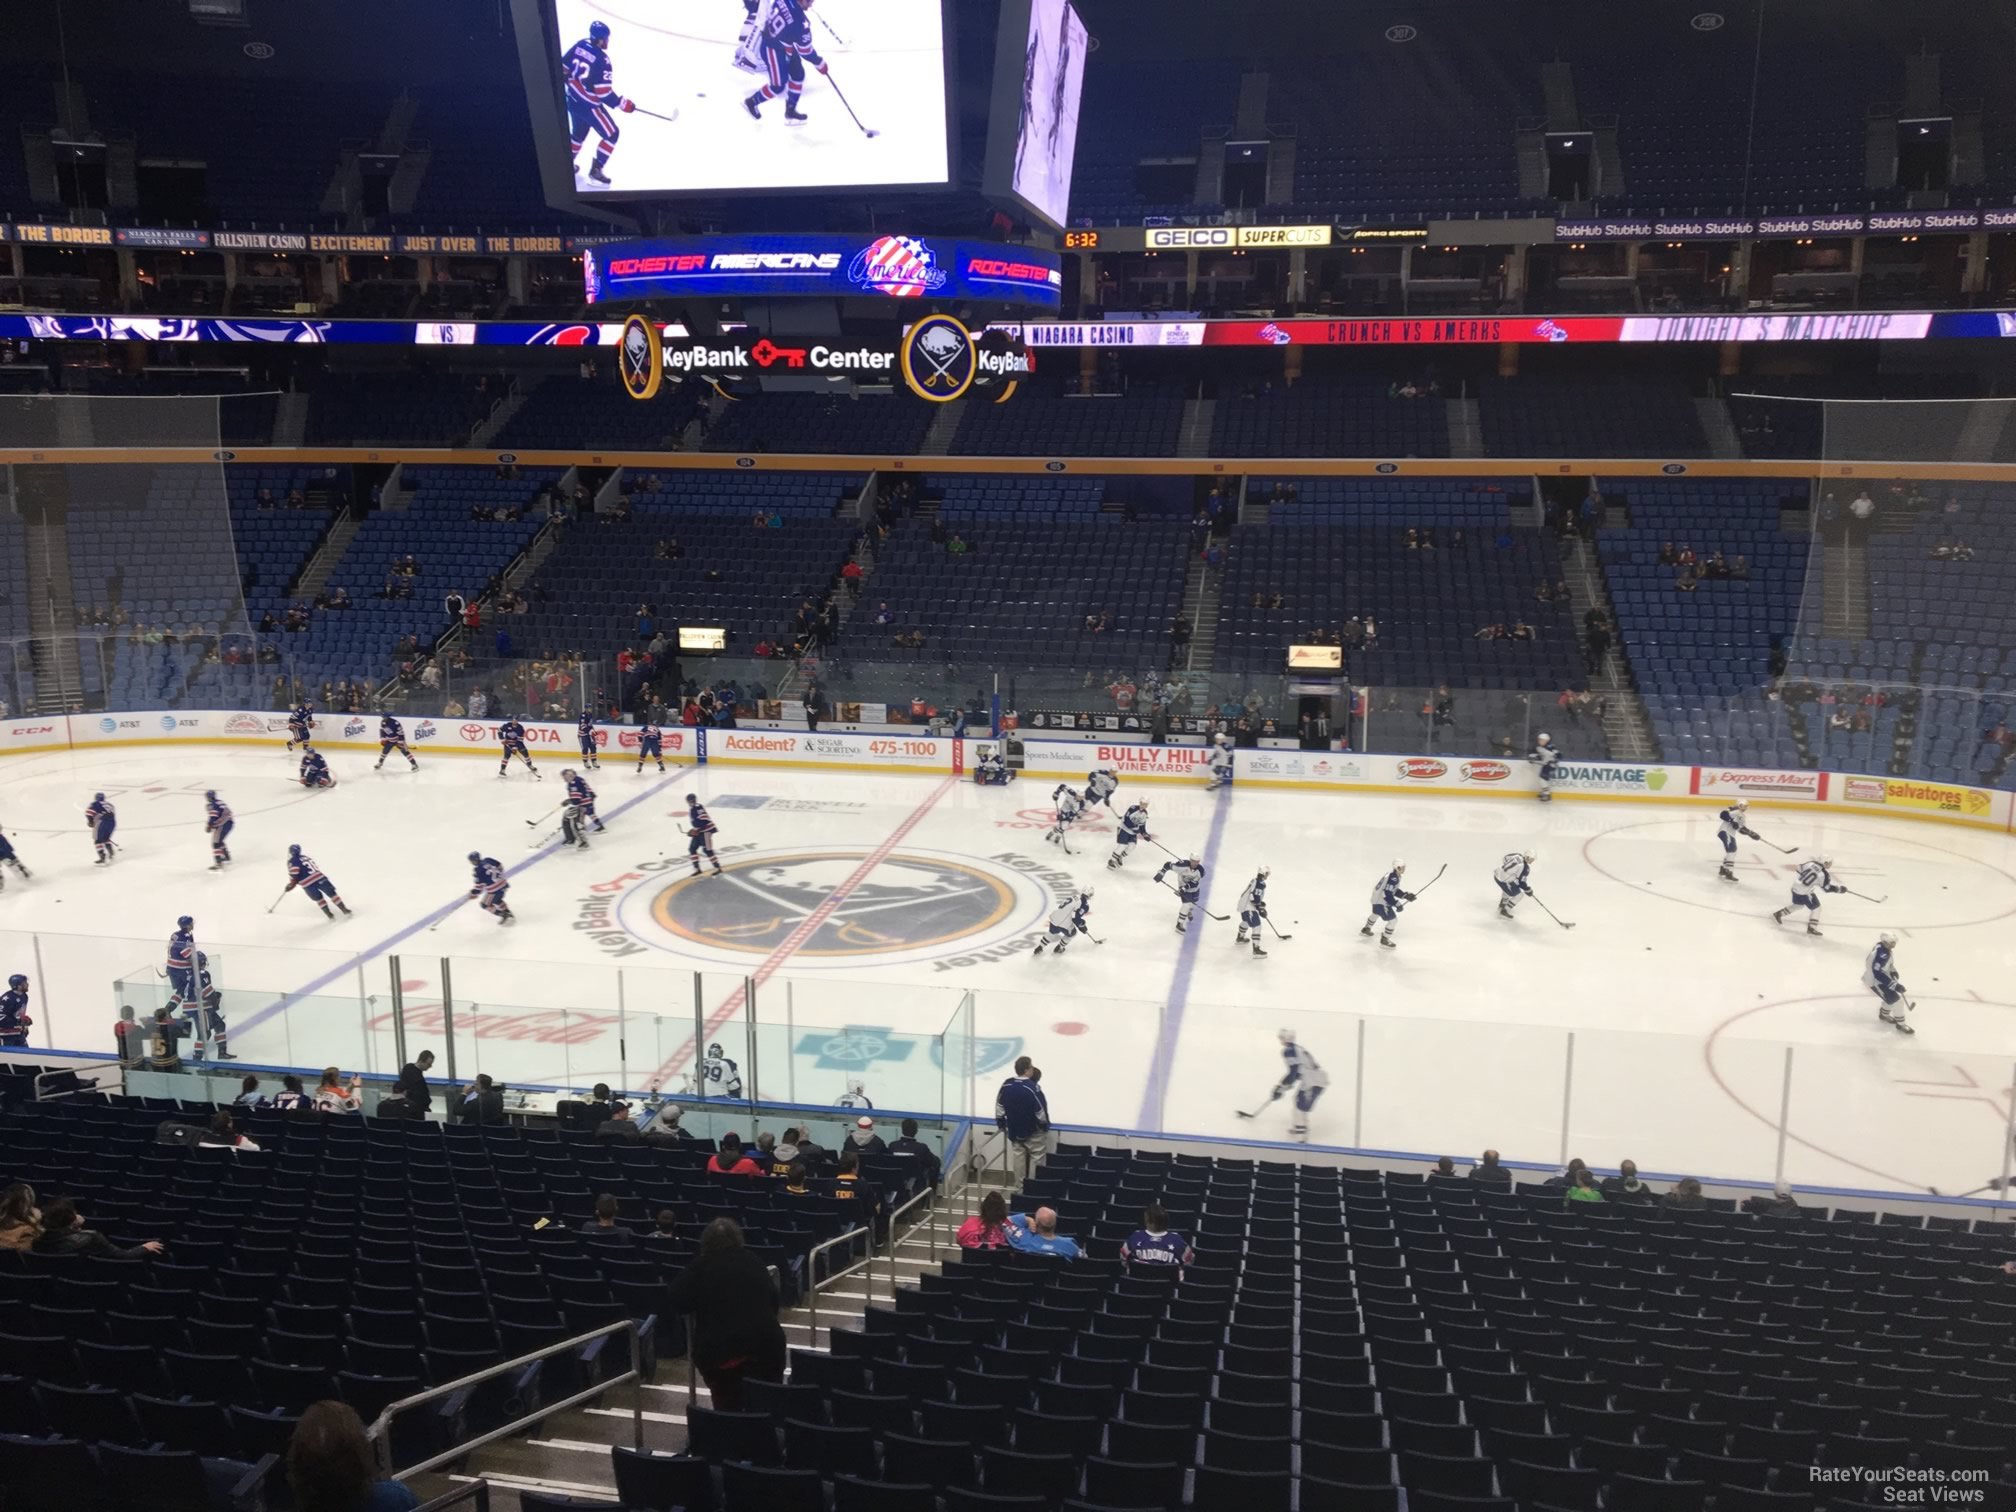 section 217, row 4 seat view  for hockey - keybank center